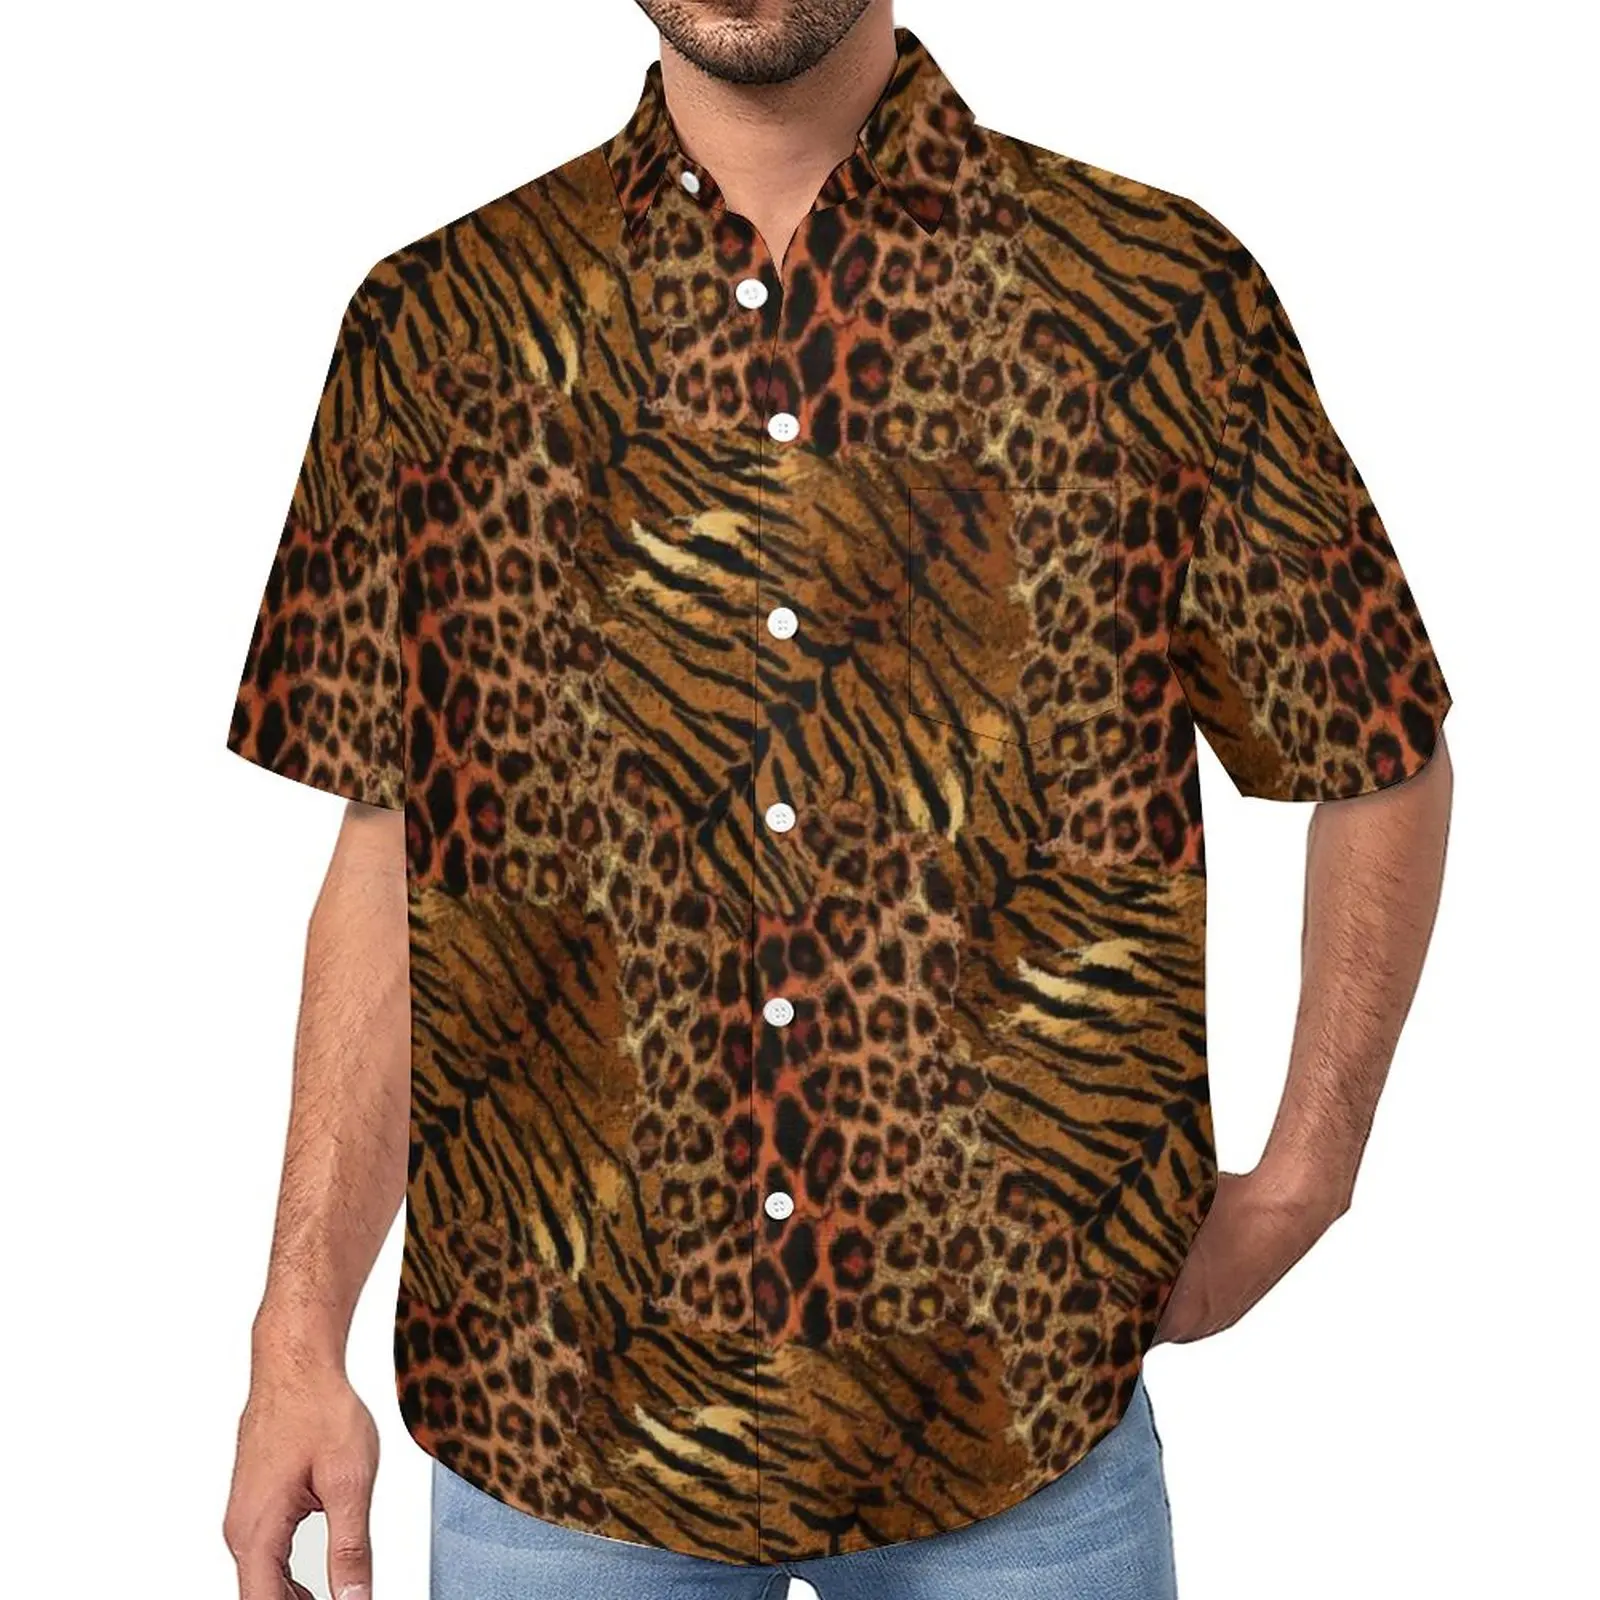 

Leopard Tiger Skin Vacation Shirt Trendy Spotted Striped Cat Hawaiian Casual Shirts Streetwear Blouses Short-Sleeve Design Tops